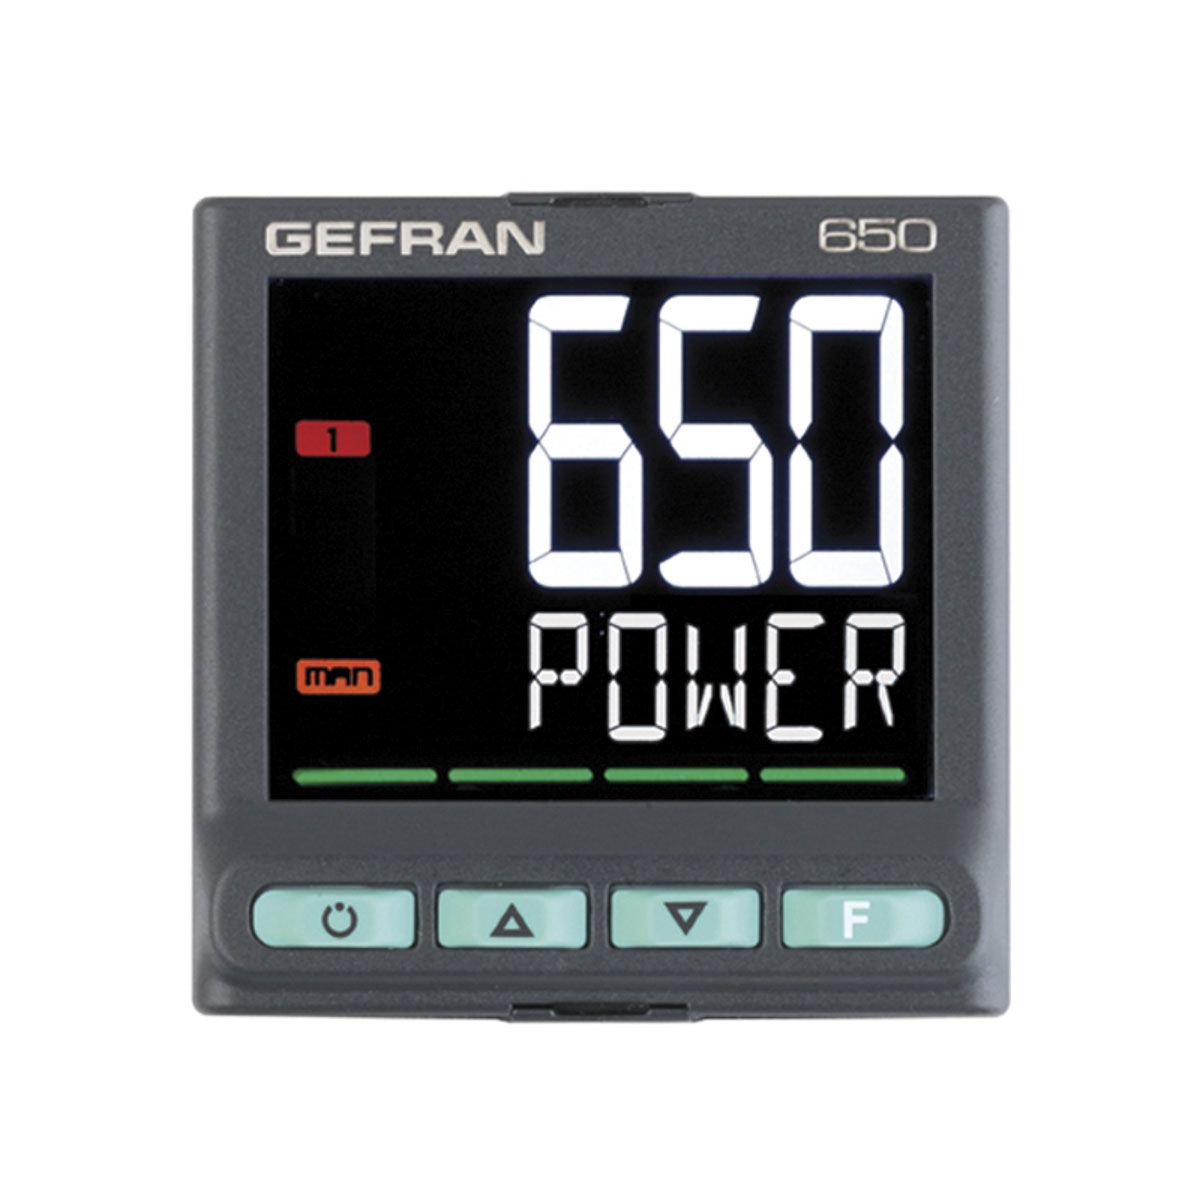 Gefran 650 PID Temperature Controller, 48 x 48mm, 3 Output Analogue, Relay, 20 → 27 V ac/dc Supply Voltage